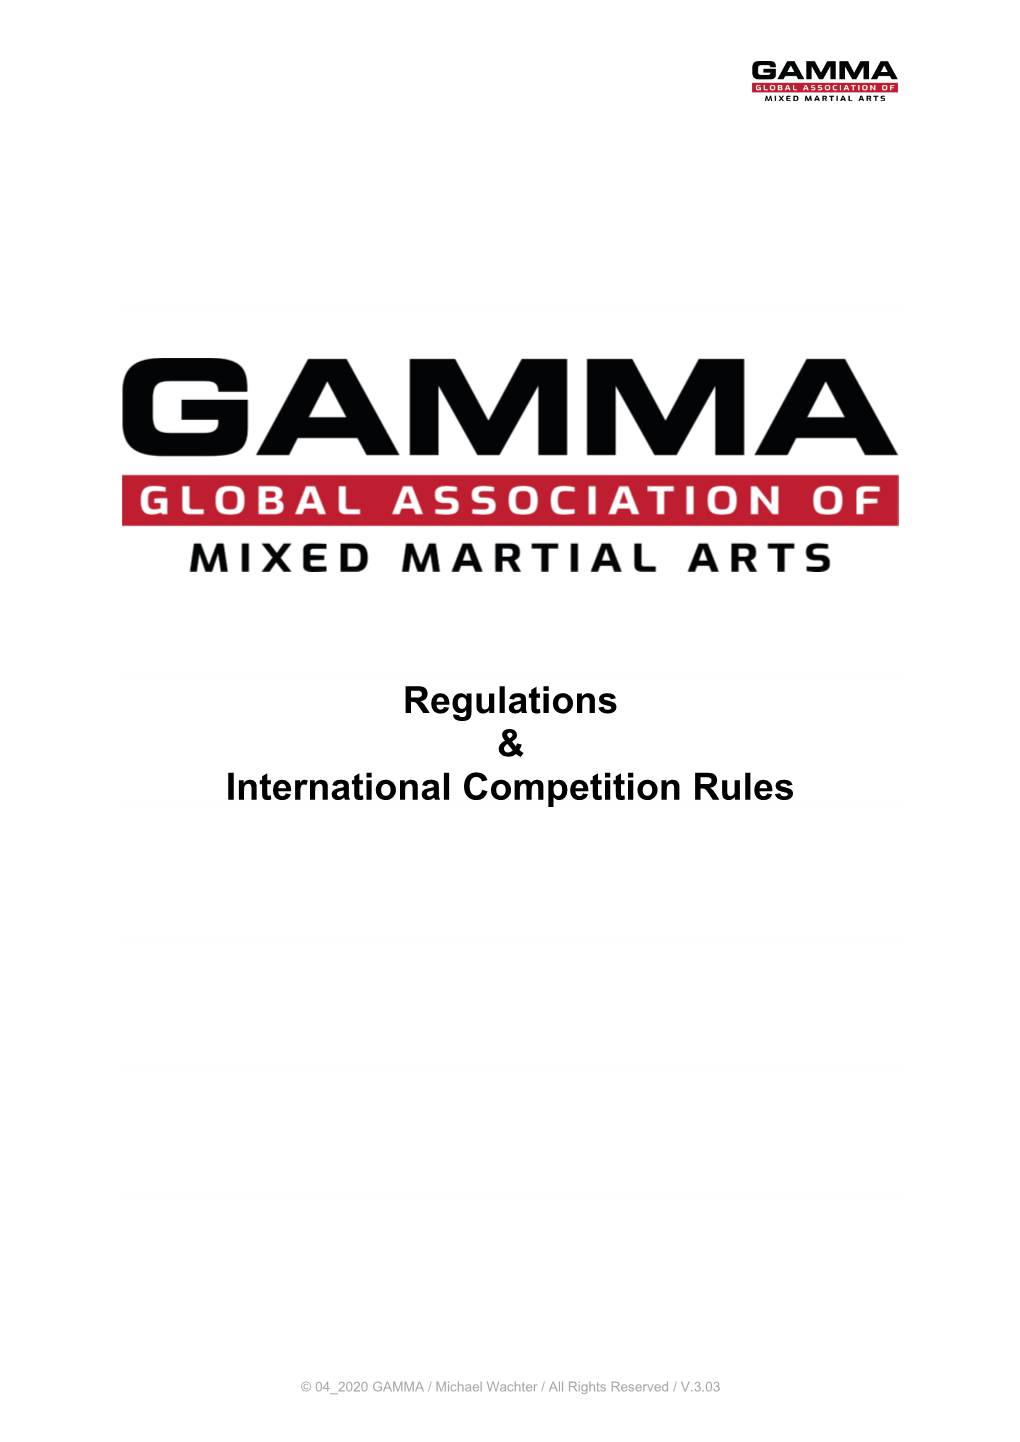 Regulations & International Competition Rules